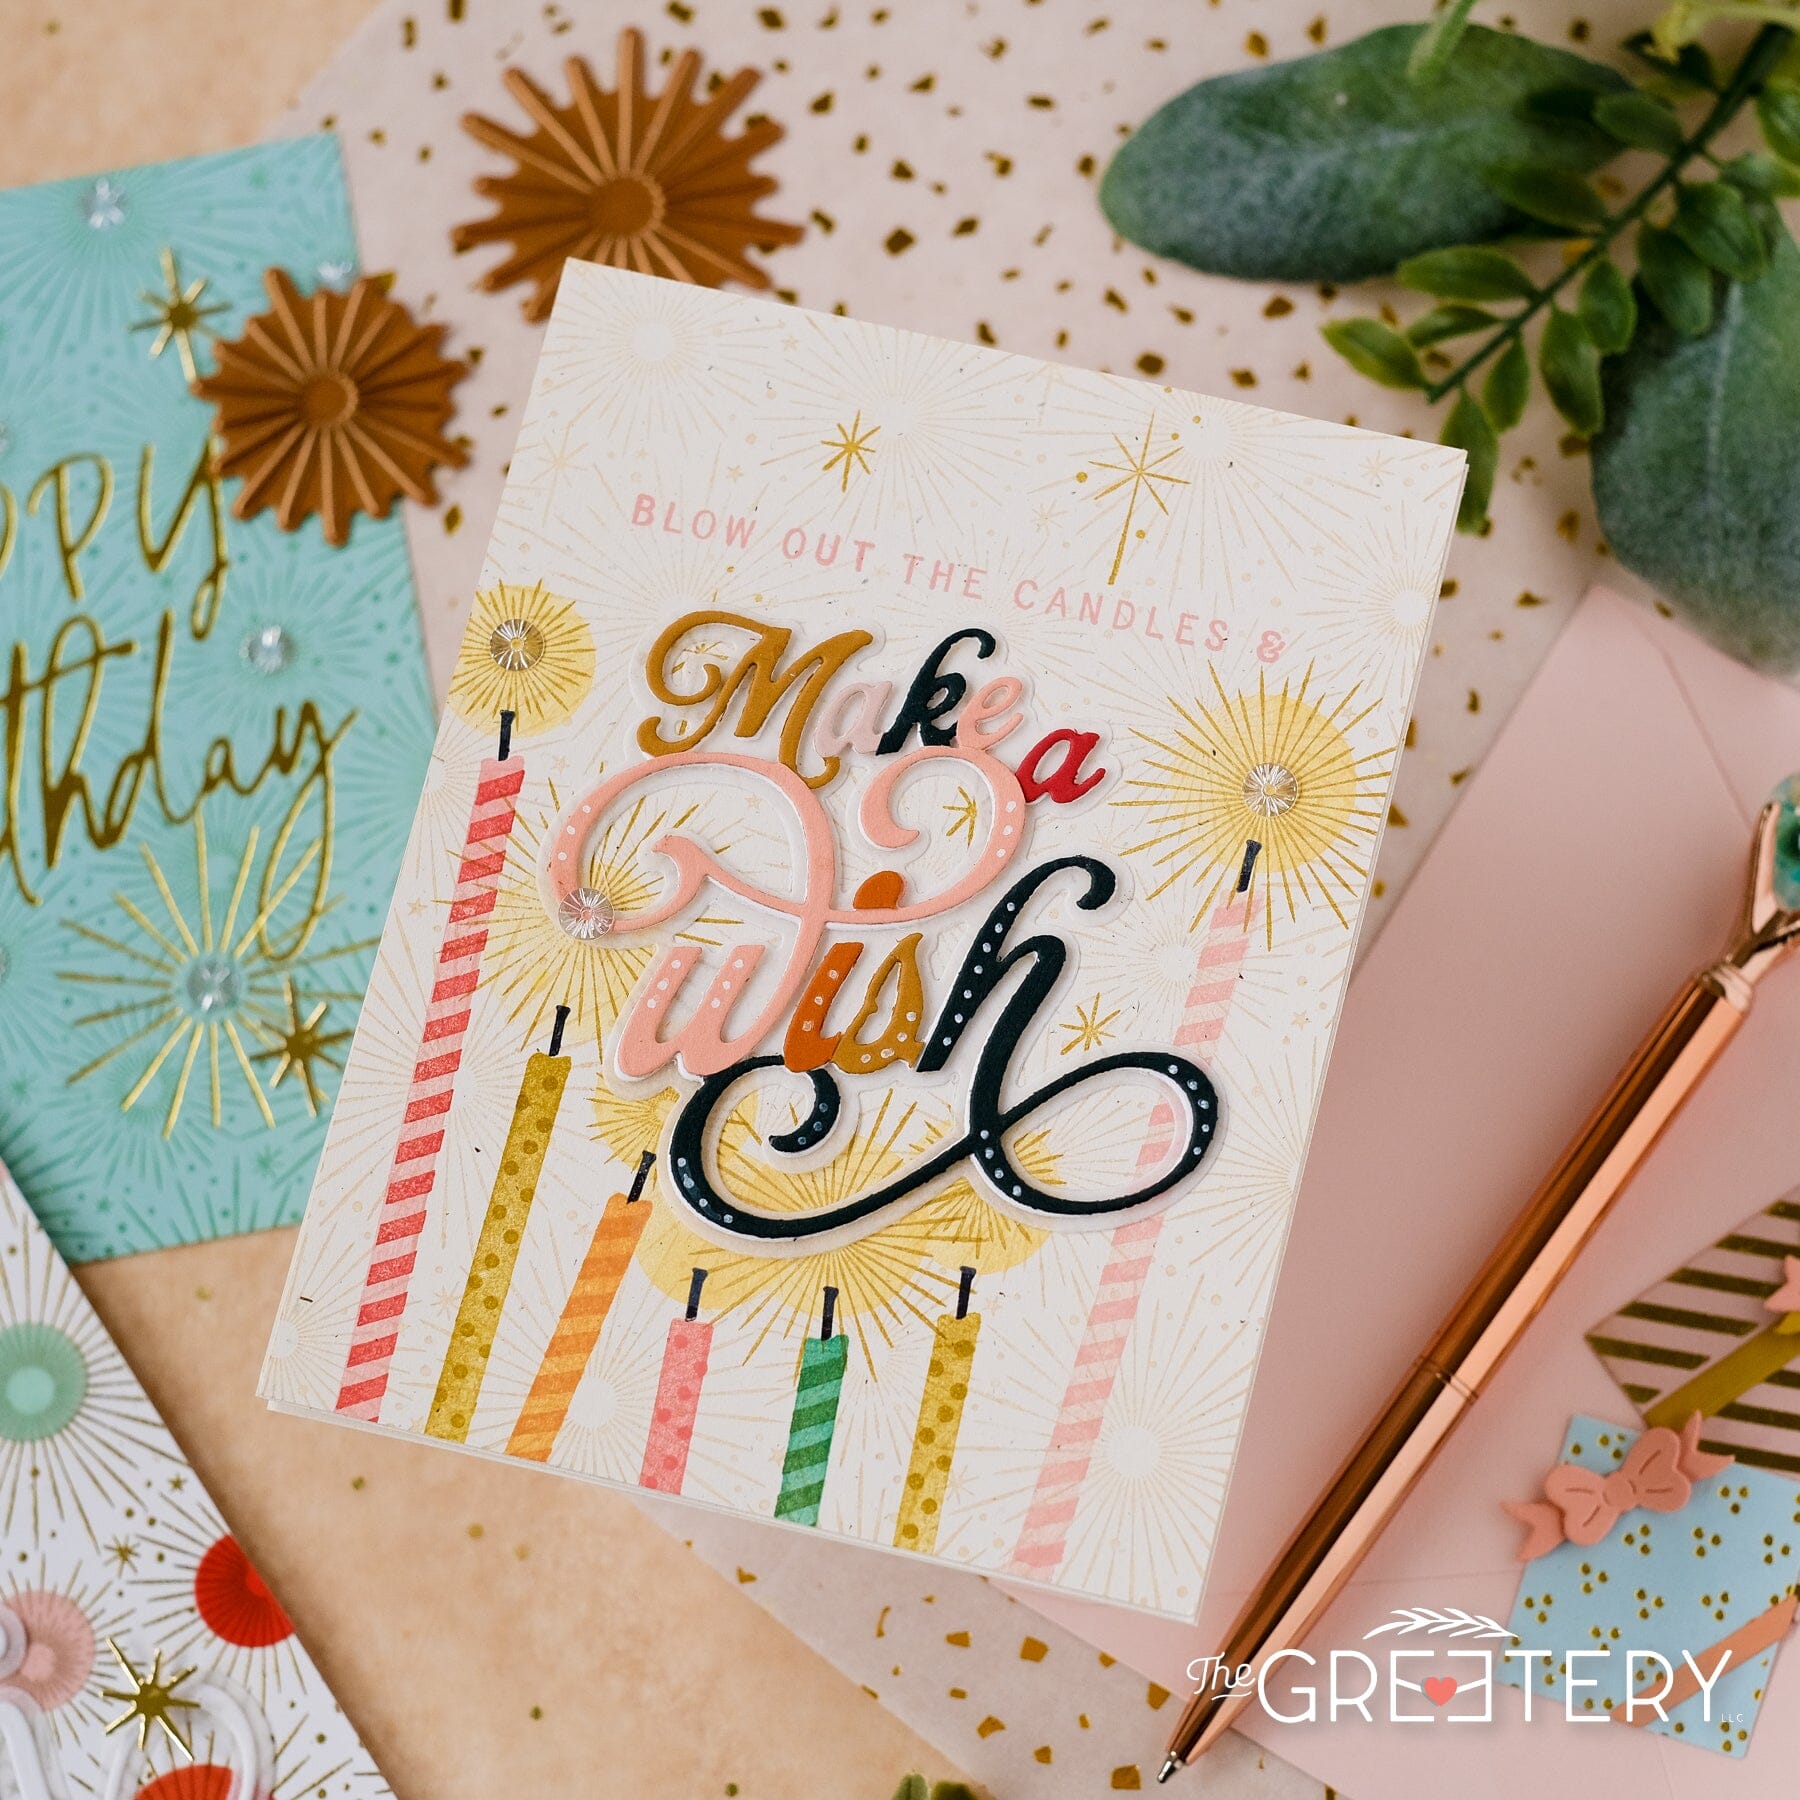 A Wish for Card Making Supplies